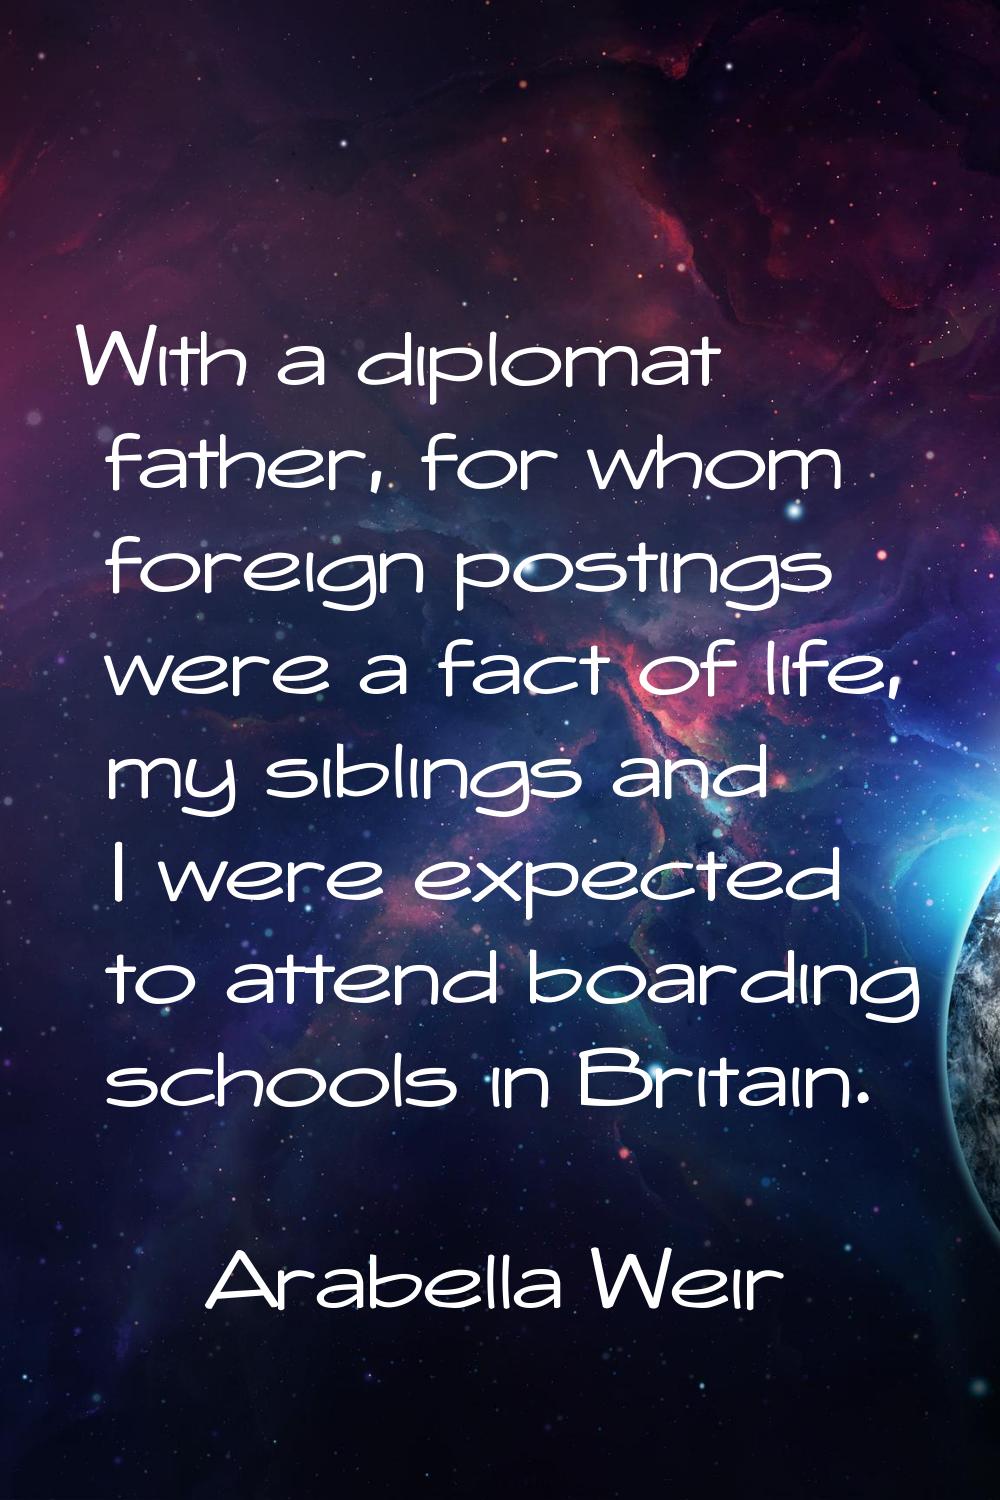 With a diplomat father, for whom foreign postings were a fact of life, my siblings and I were expec